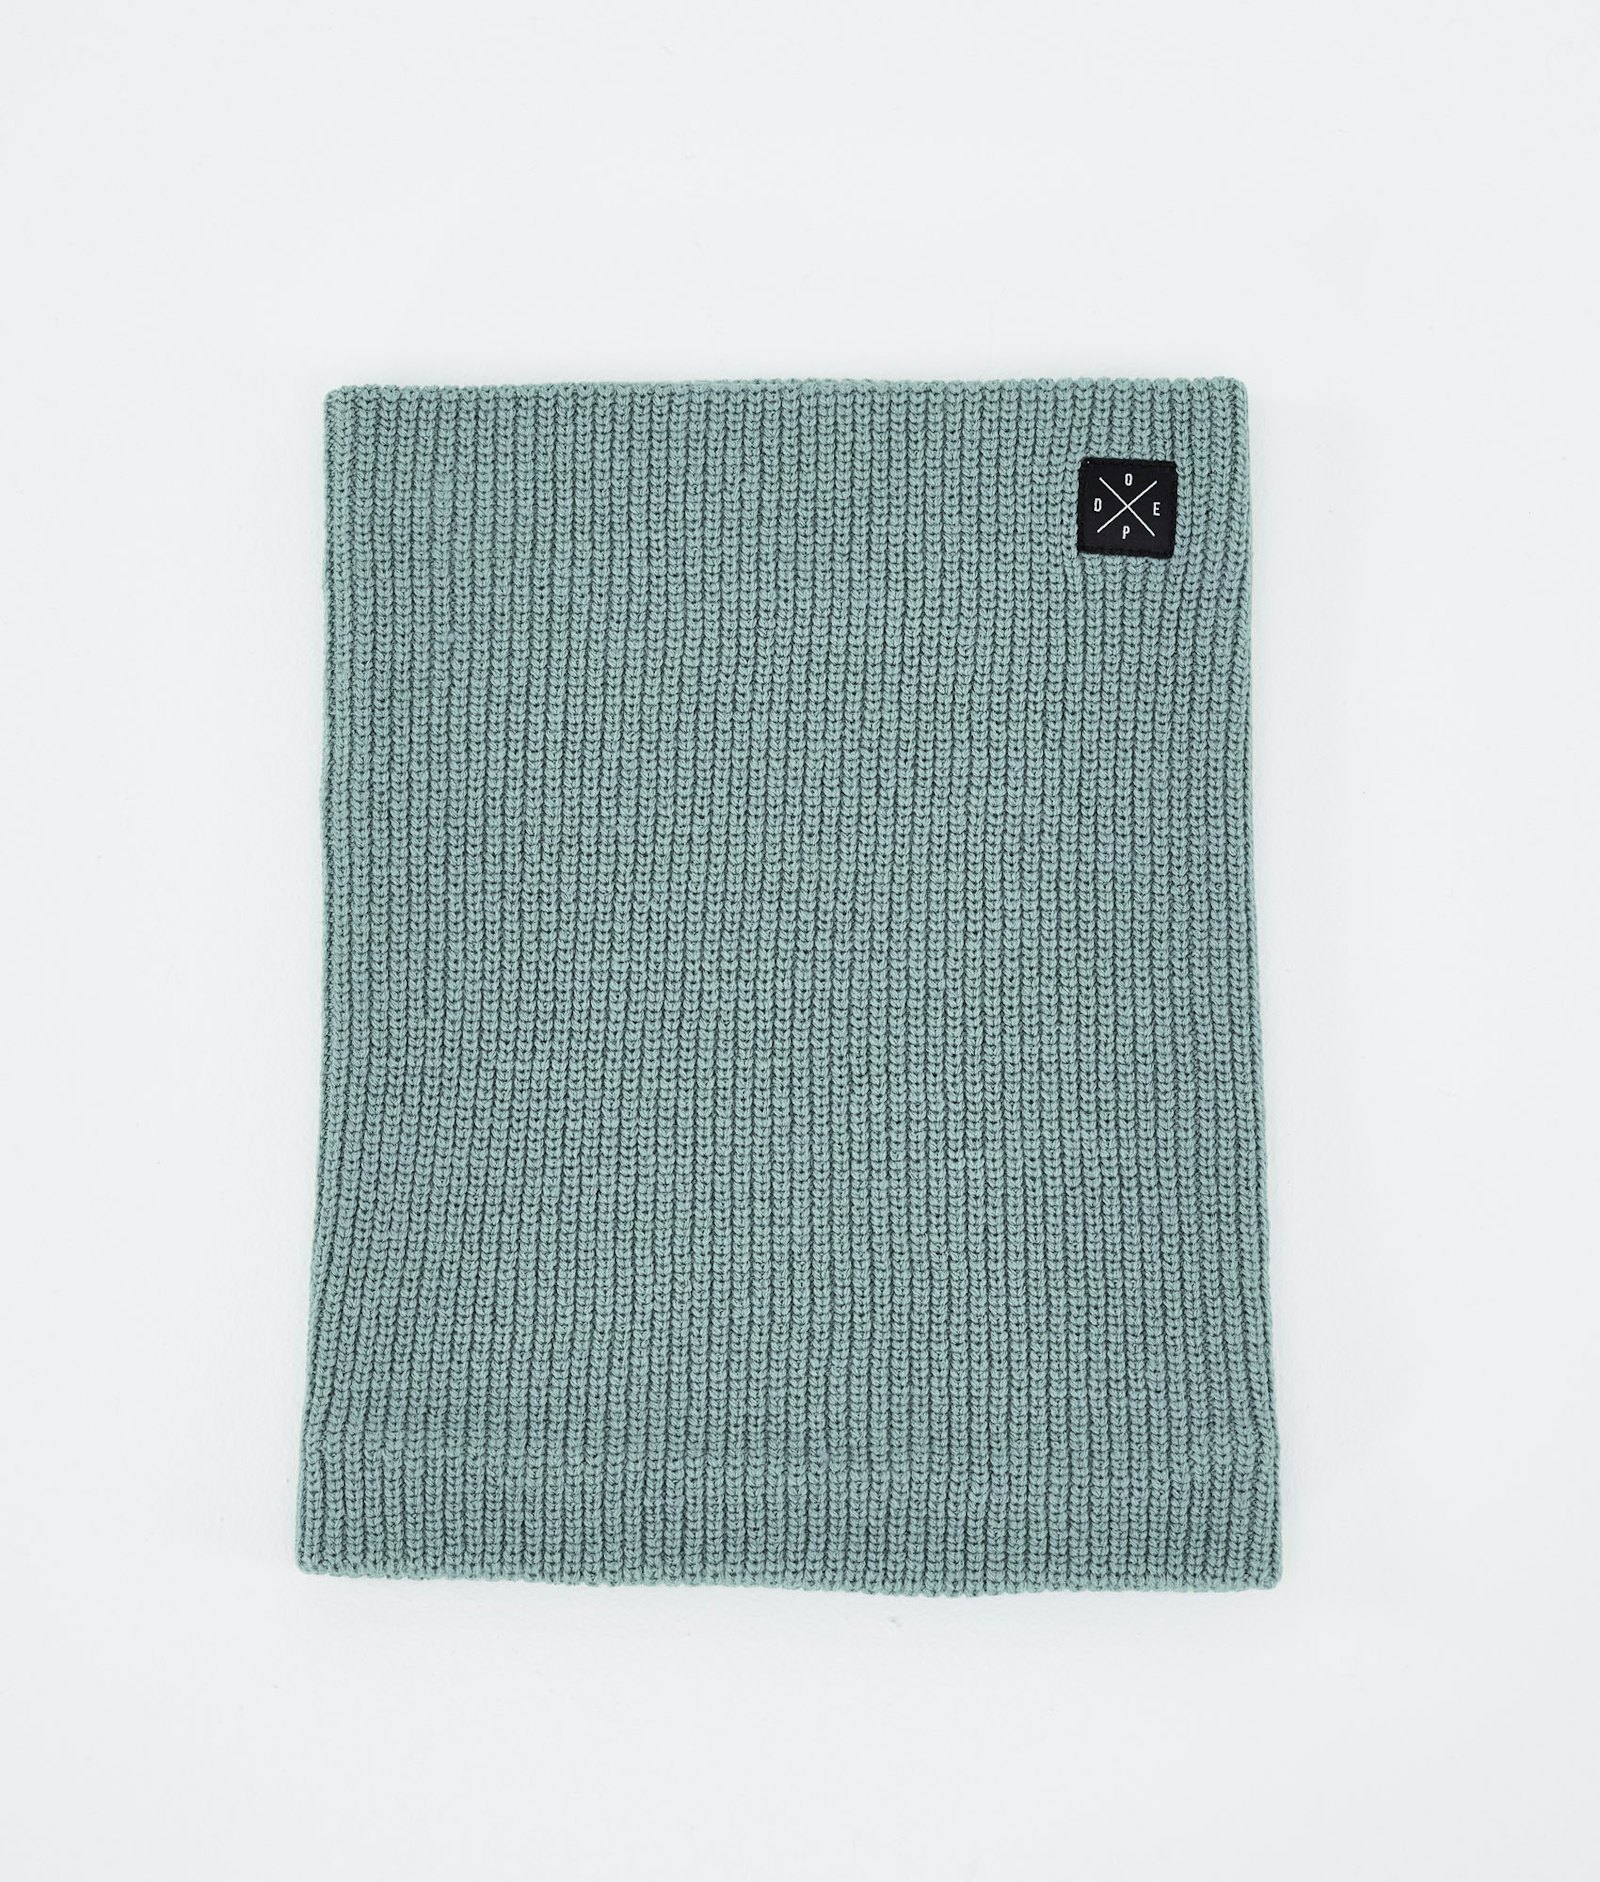 2X-UP Knitted Schlauchtuch Faded Green